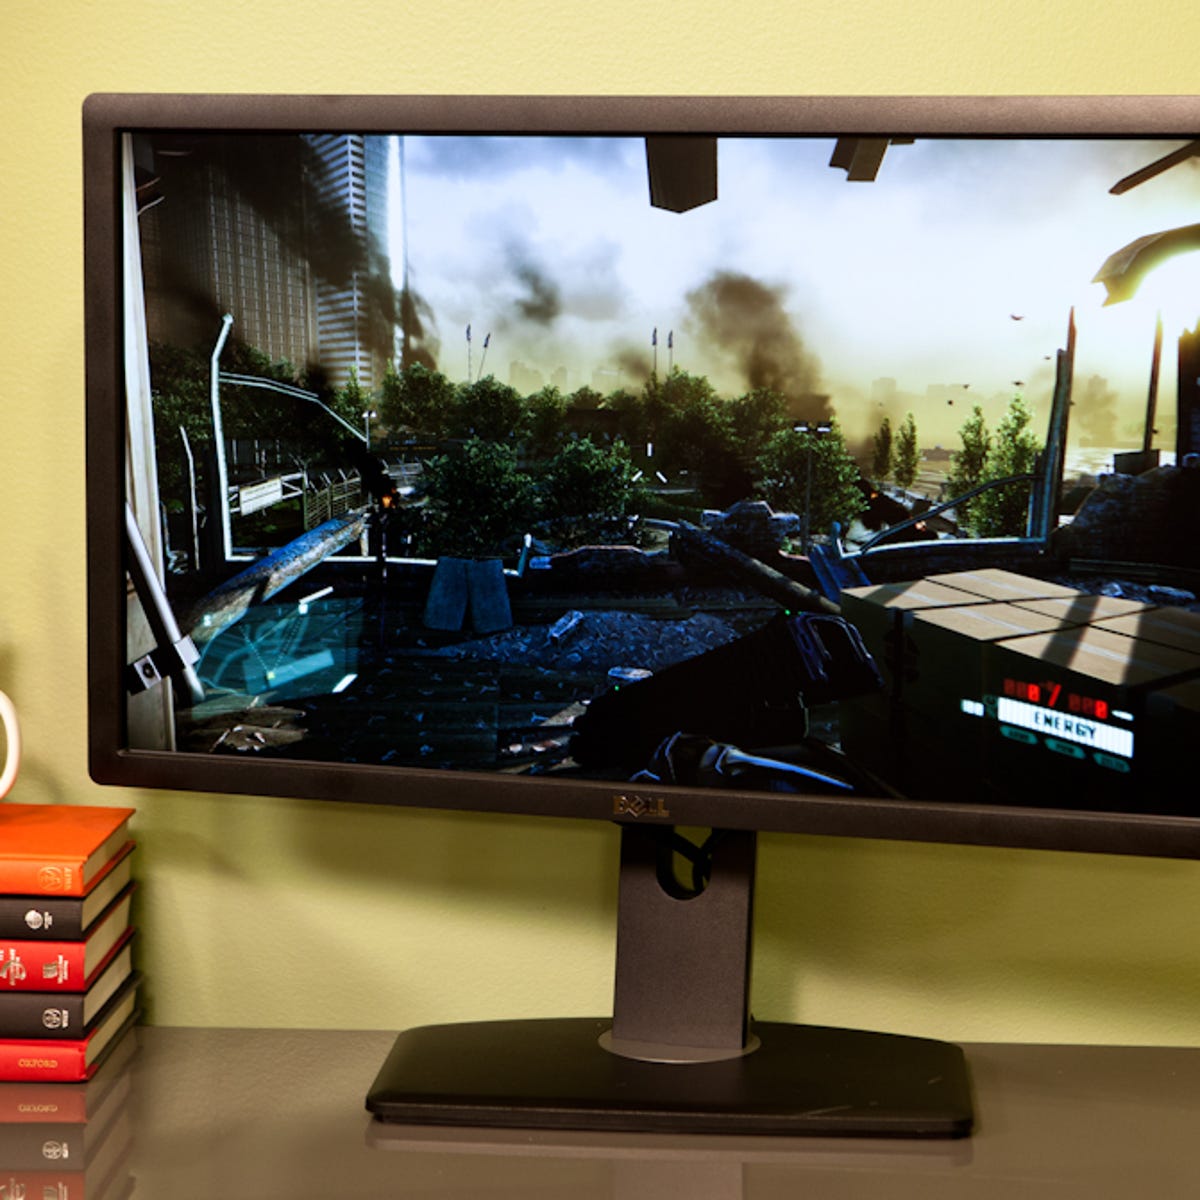 Dell UltraSharp U2713HM review: The best overall monitor - CNET